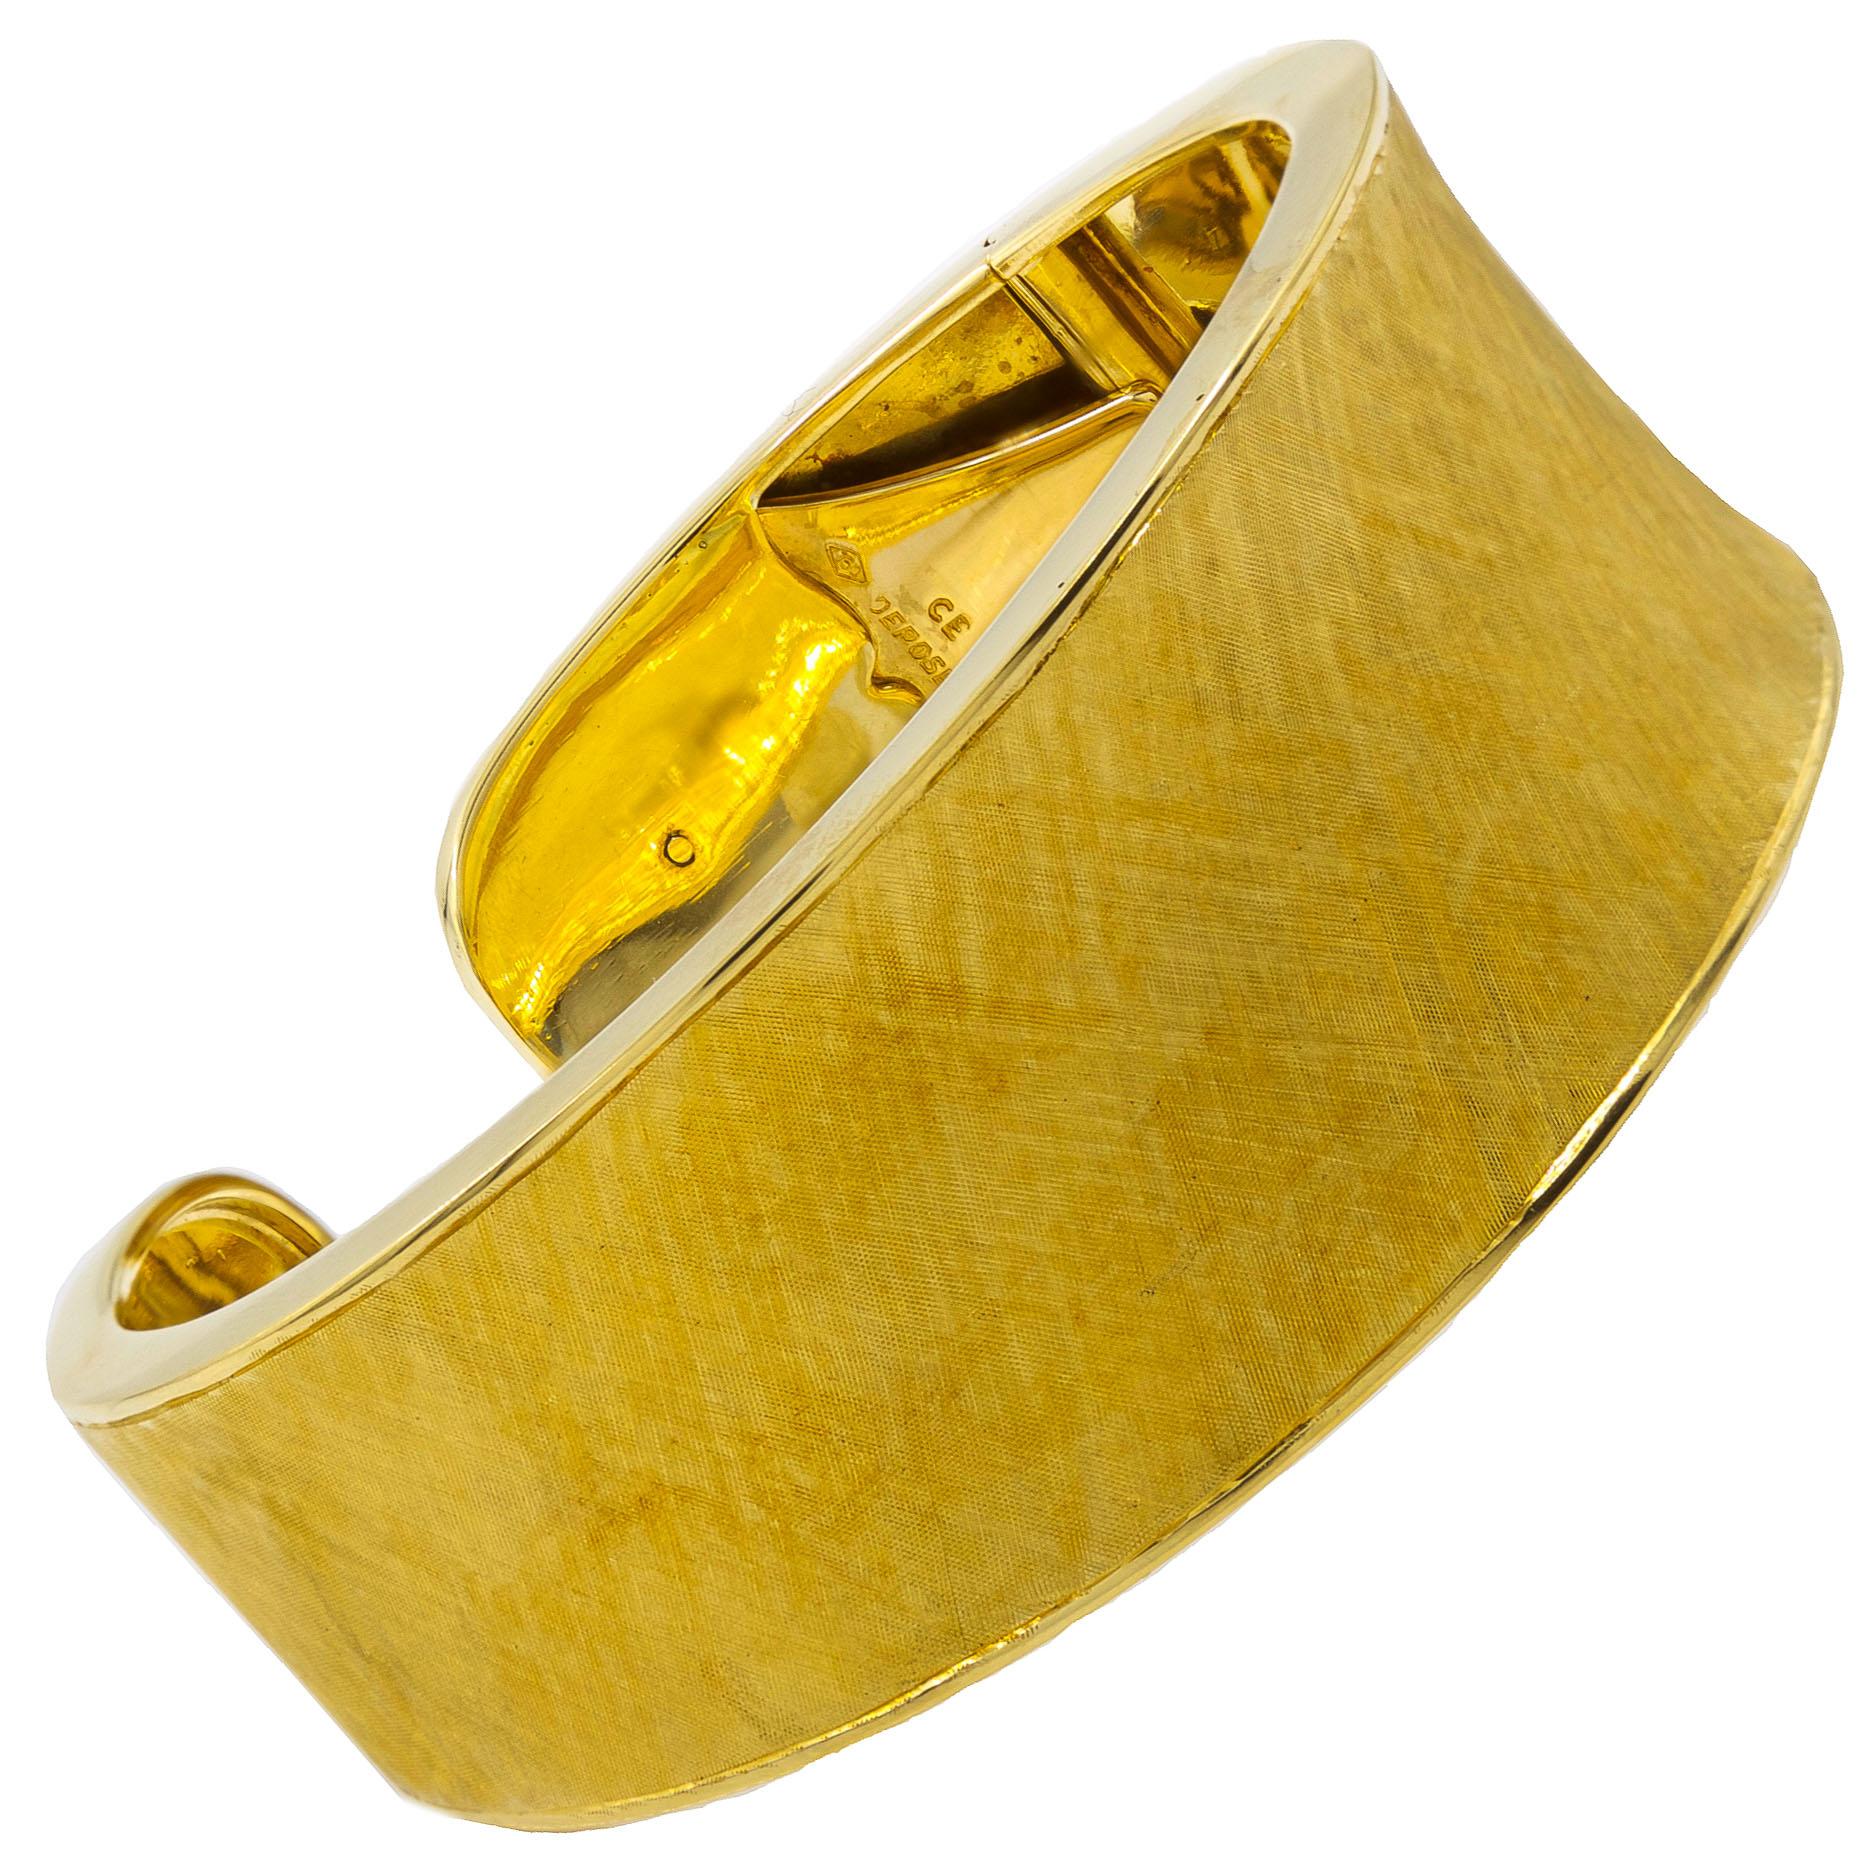 Understated and refined, this gorgeous cuff bracelet features a very clever locking hinge that allows it to easily be slipped onto the wrist before snapping the hinge closed. The surface is delicate with a pleasing cross-hatched brushed florentine